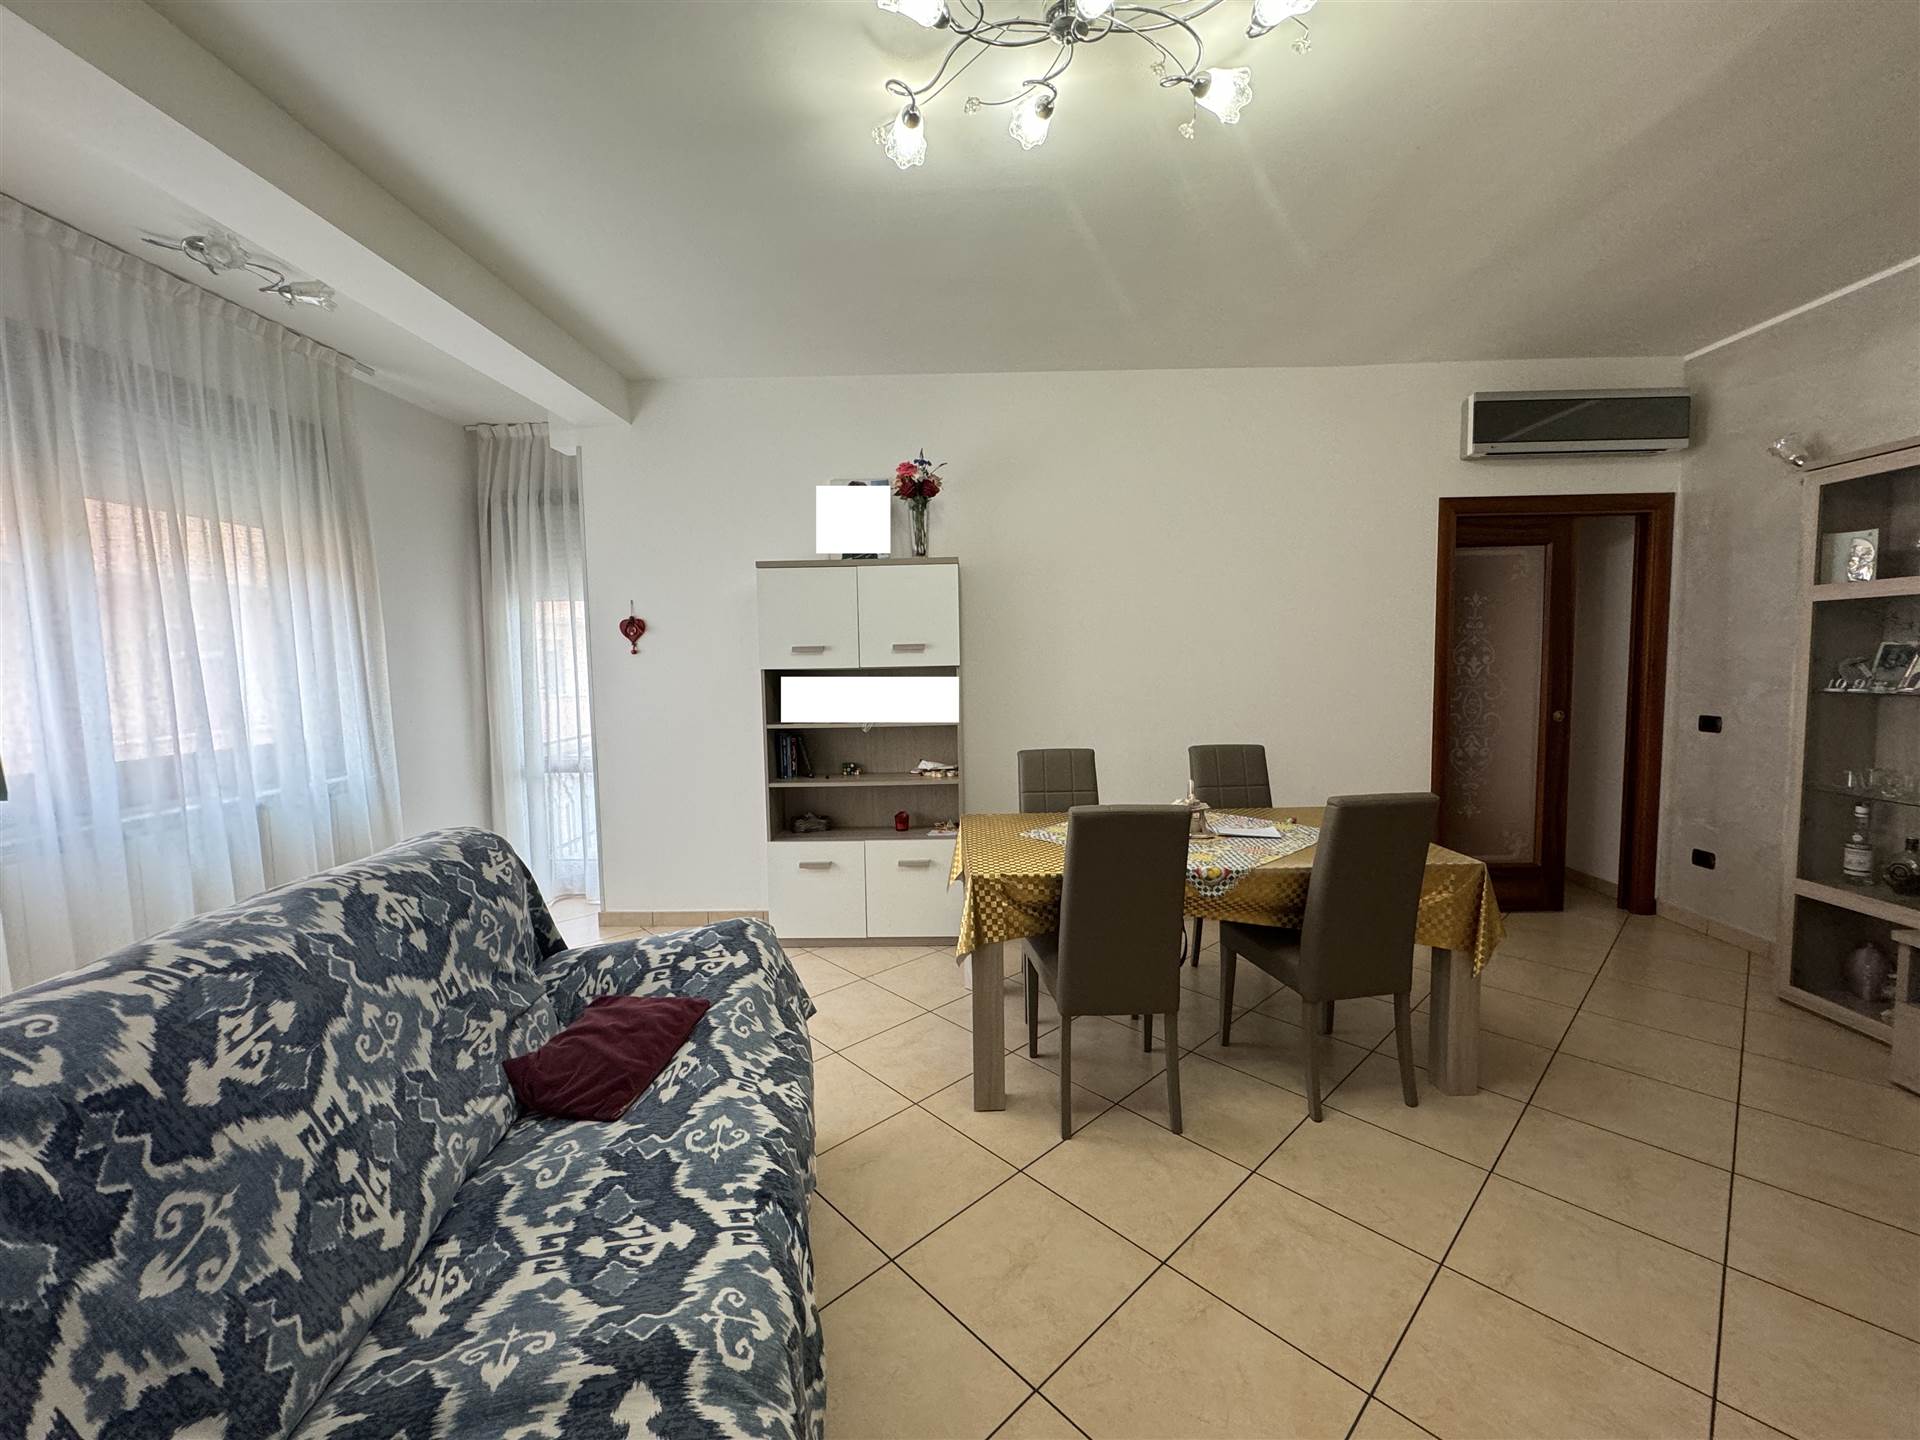 SOTTOMARINA, CHIOGGIA, Apartment for sale of 80 Sq. mt., Good condition, Heating Individual heating system, Energetic class: E, Epi: 91,8 kwh/m2 year,